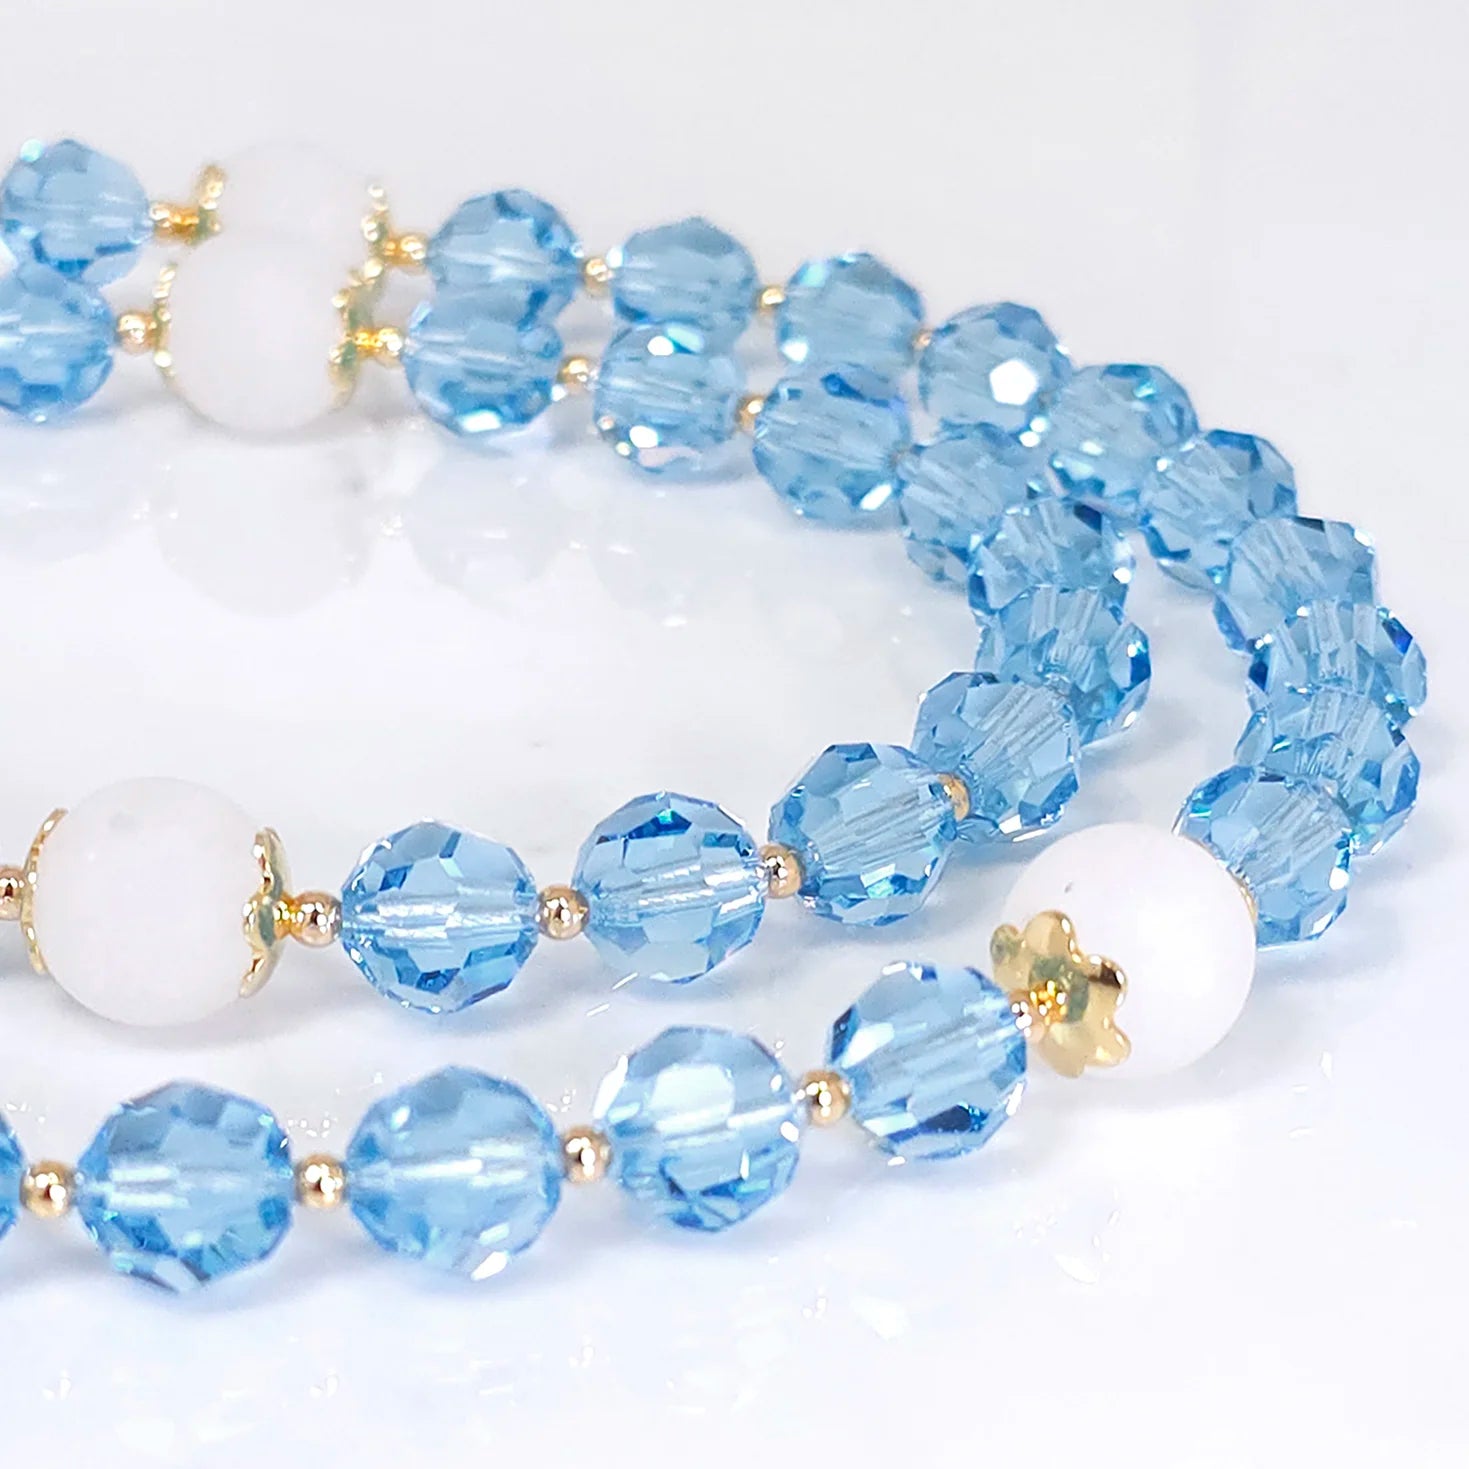 Elegant rosary made with blue Swarovski beads, accentuated by 10 mm Matte White Jade.